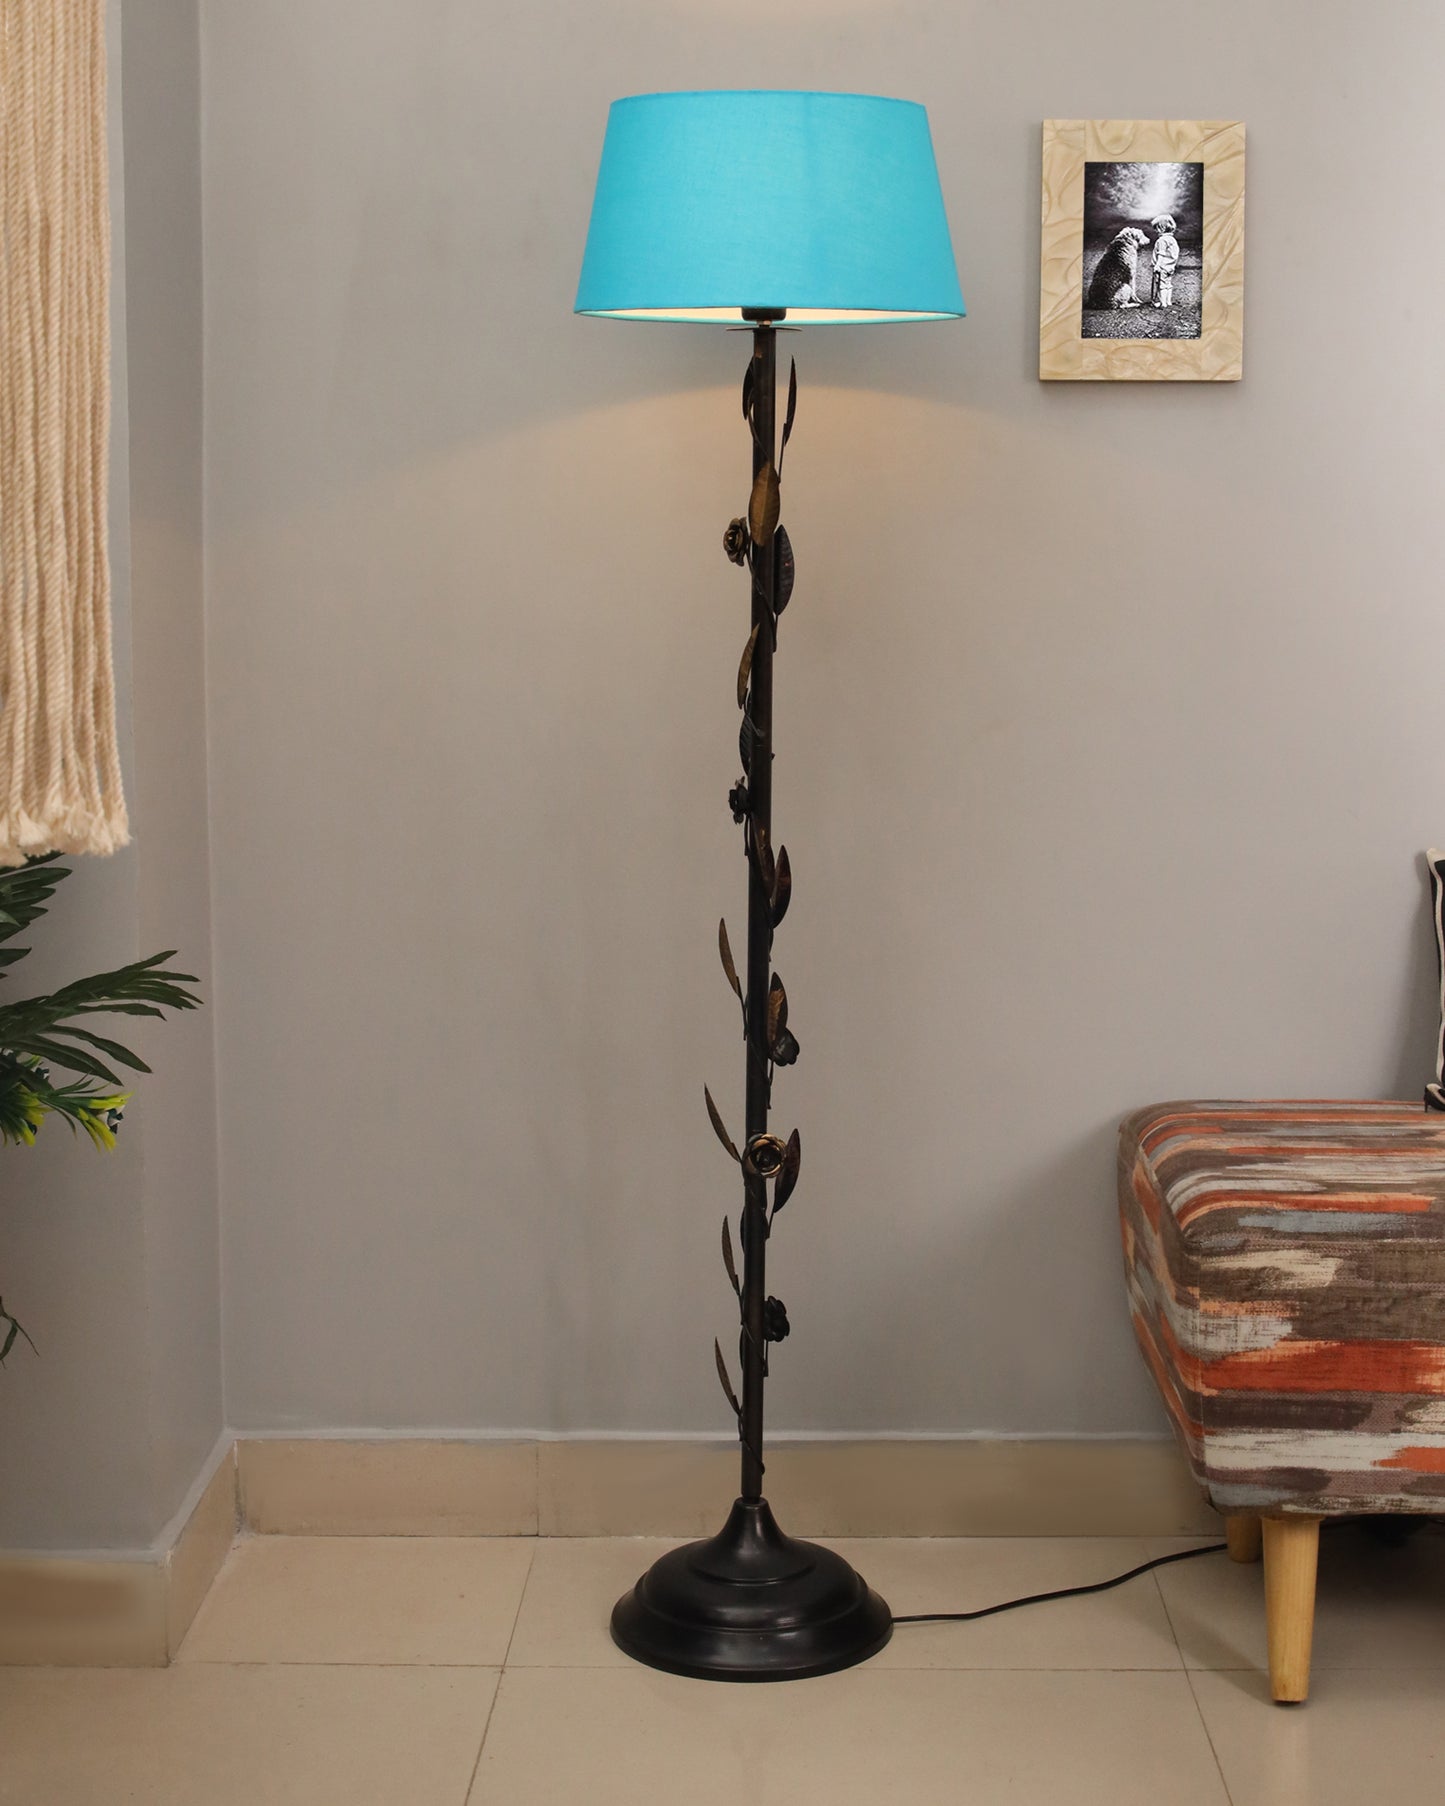 Contemporary Metal Floor Lamp,Contemporary Minimalist Standing Floor Light with Iron Legs,E27 Lamp Base,Modern Design Standing Light for Living Room,Study Room and Bedroom, Floral